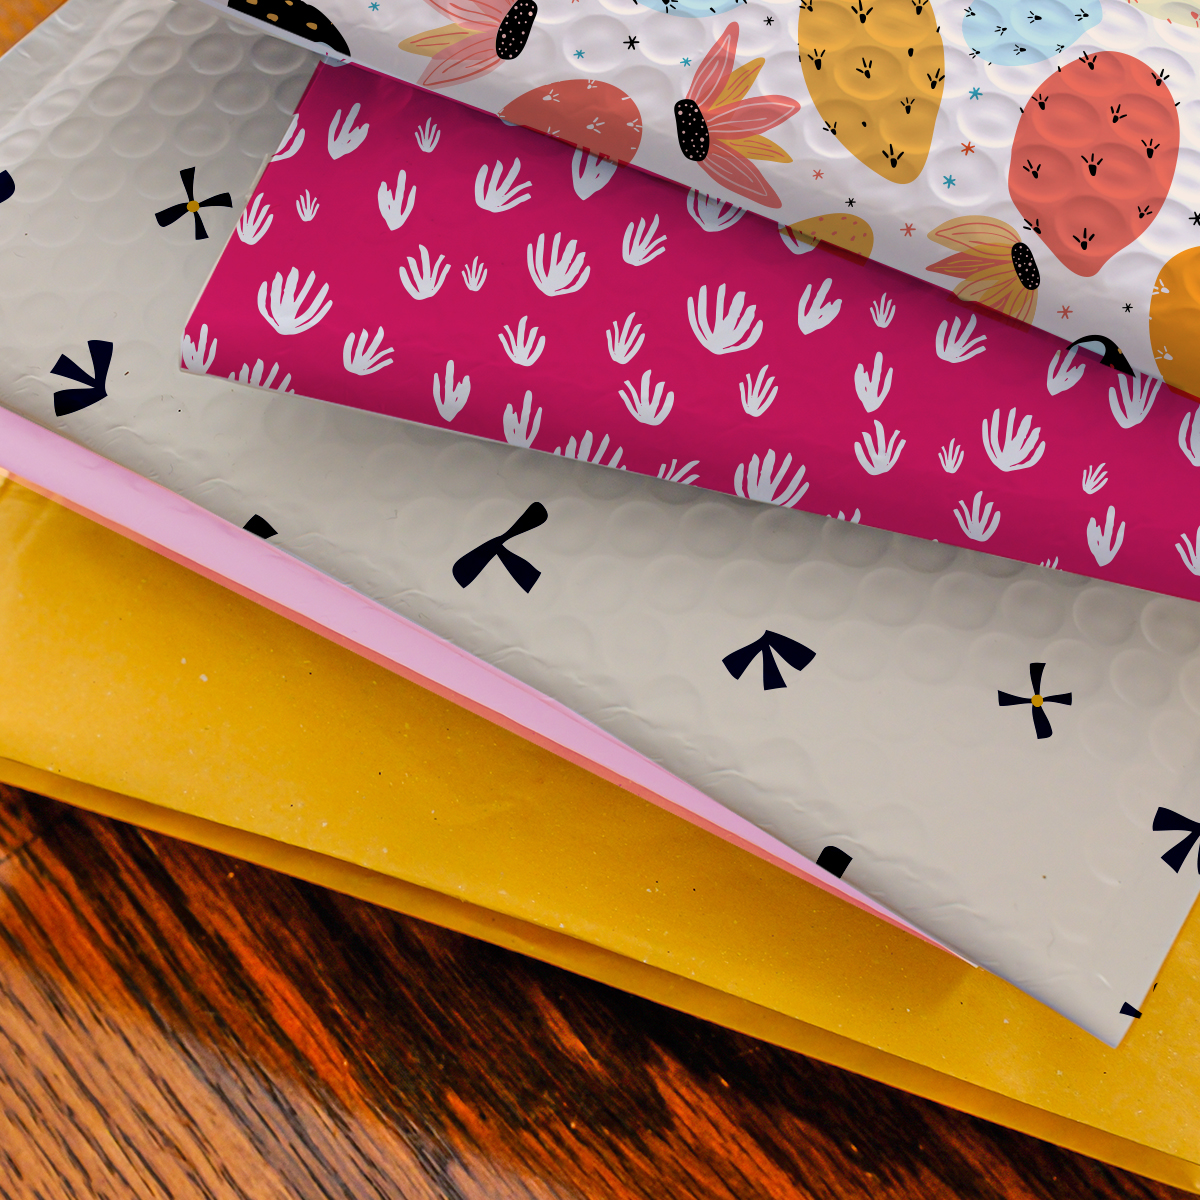 small business packaging. image shows a stack of patterned bubble mailer envelopes.